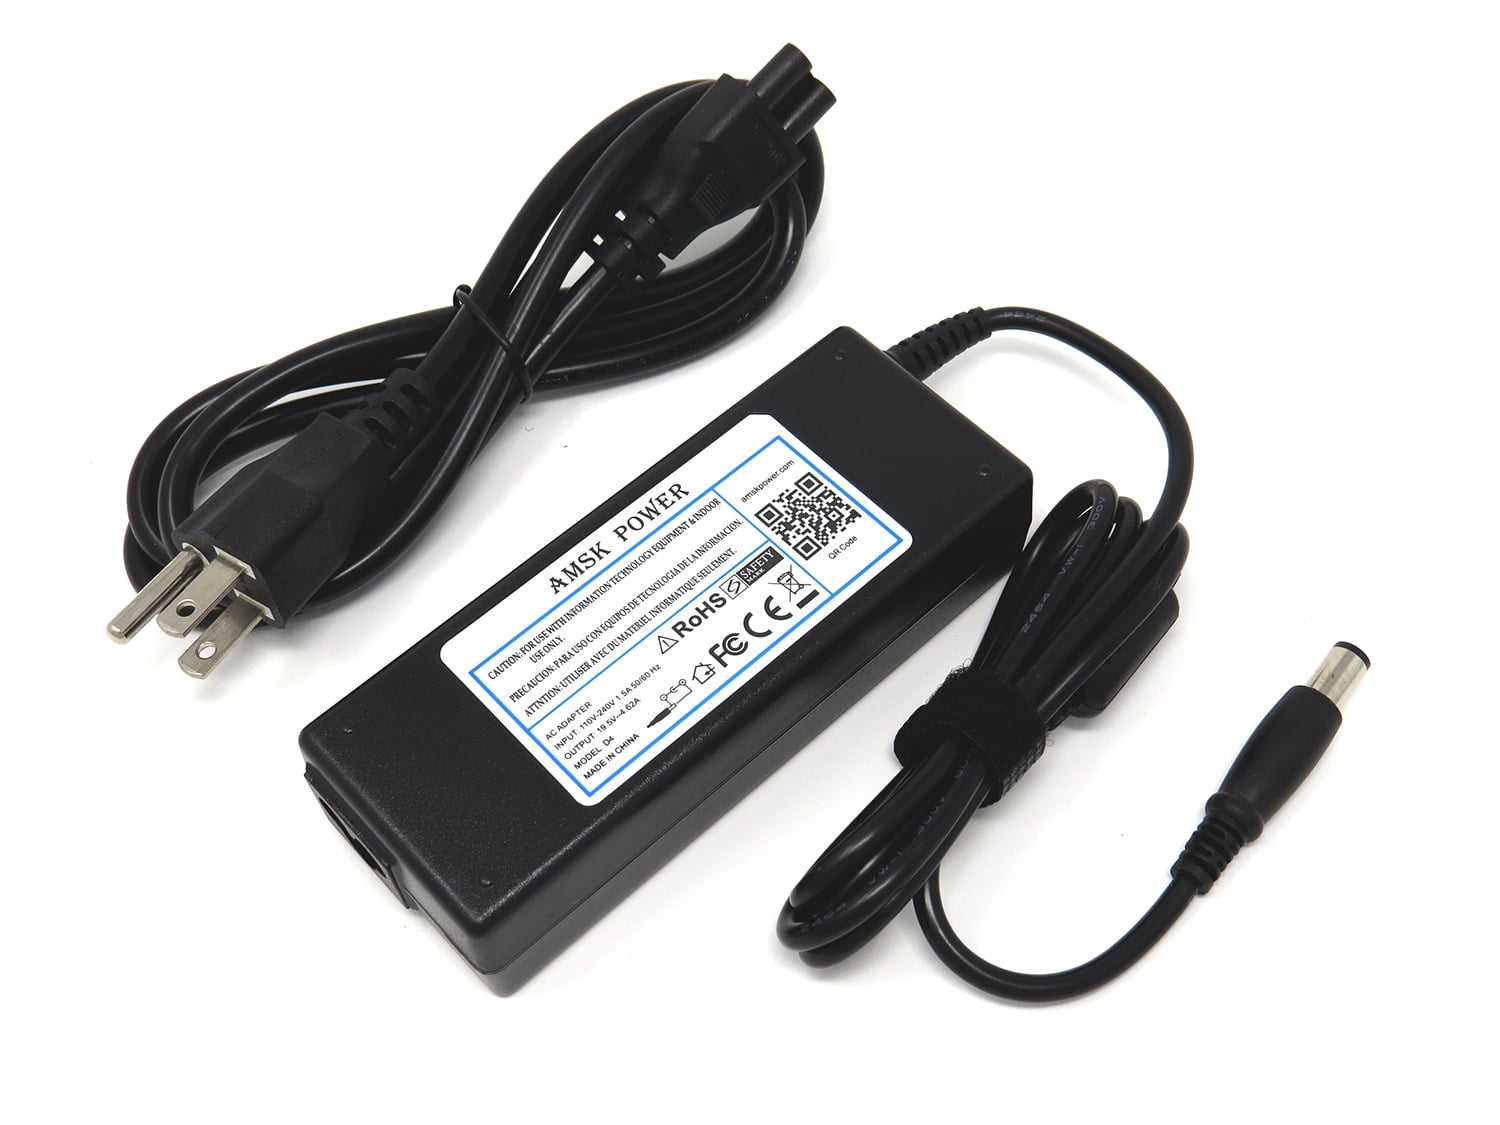 Reis Beweegt niet . Ac Adapter for Dell Latitude E5420 E5420m E5520 E5520m E6220 E6250 E6320  E6420 E6520 ; DELL XPS 15 L502x X15L-1024ELS 15z XPS15z-72ELS Laptop Power  Supply Cord Notebook Battery Charger - Walmart.com